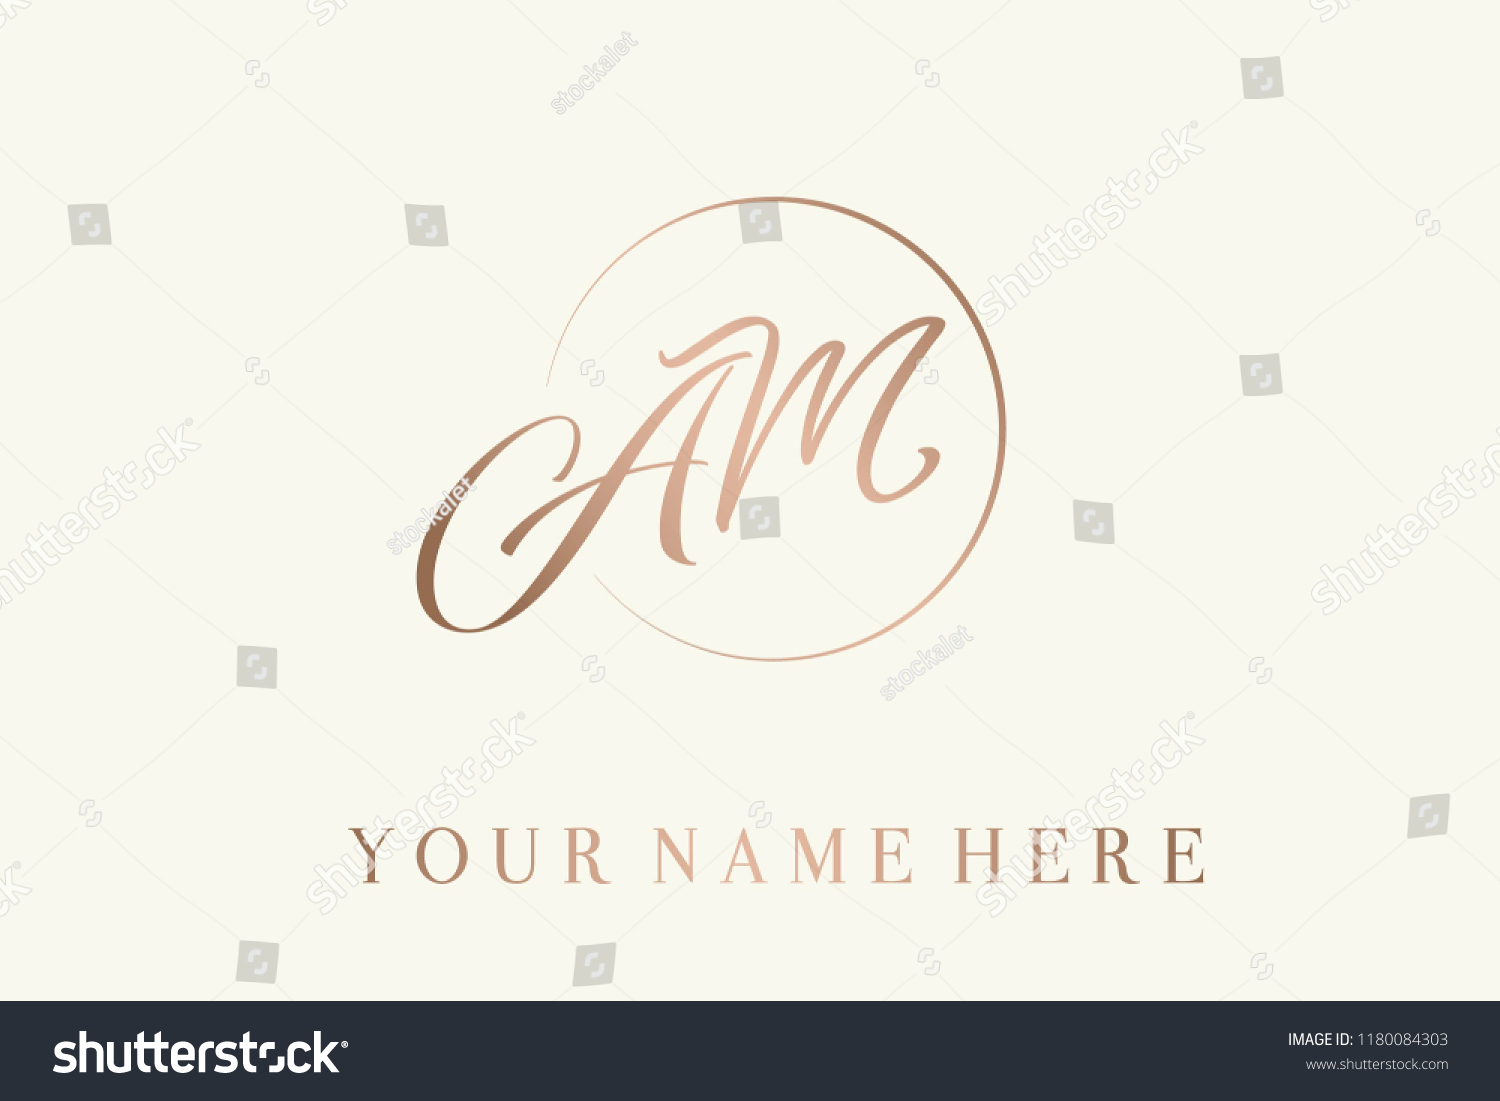 AM calligraphic monogram in rose gold metallic color.Logo with elegant letter a and letter m in a circular frame.Emblem style lettering vector icon isolated on light background. #1180084303